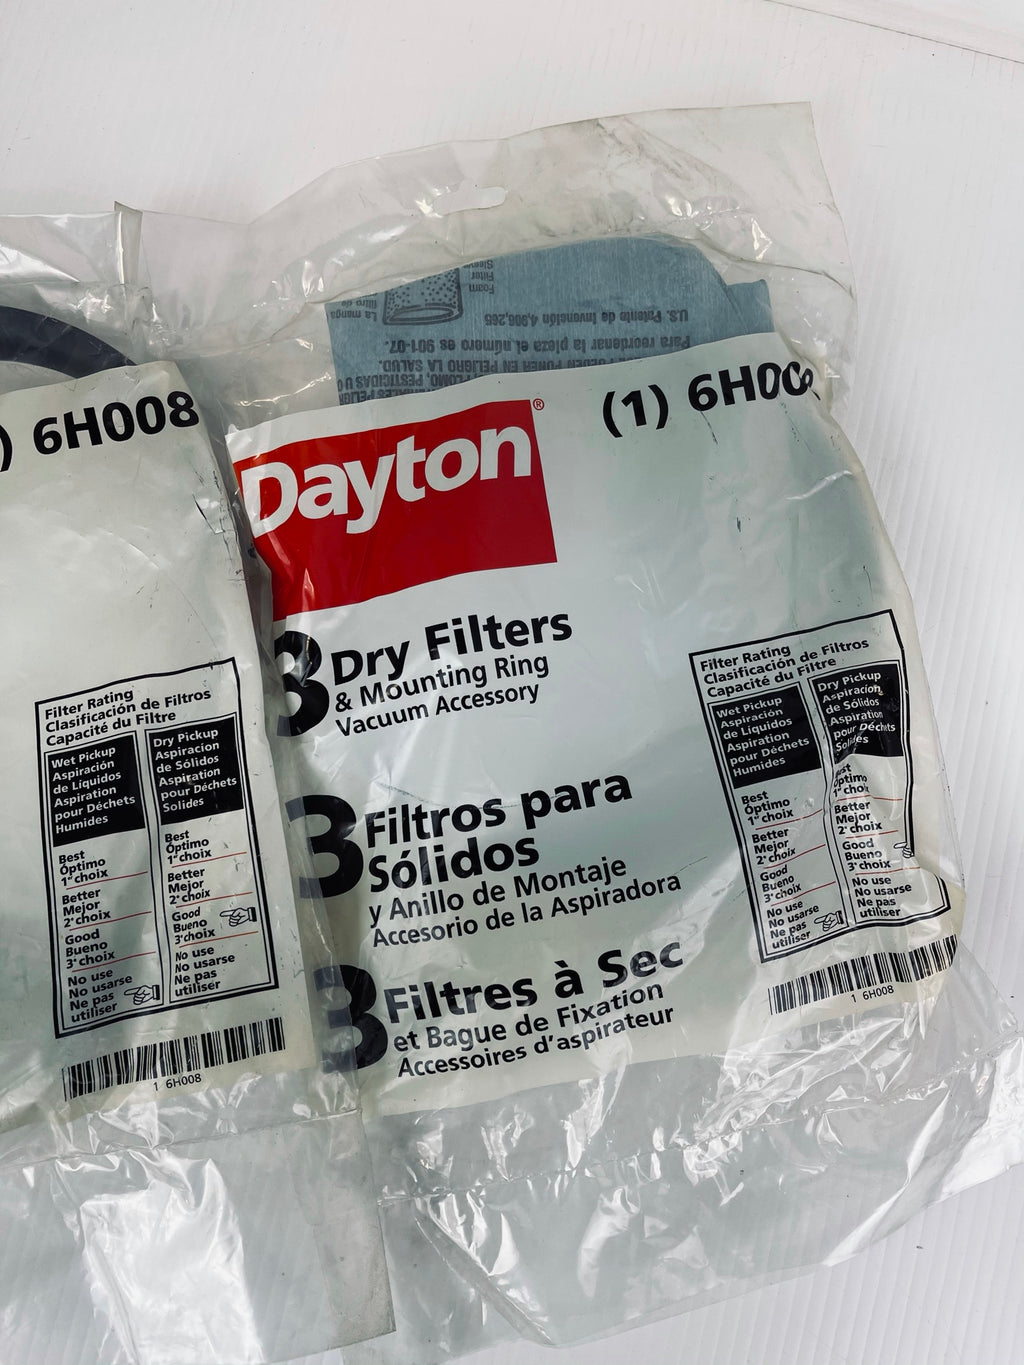 DAYTON 3 DRY FILTERS 6H008 NEW IN FACTORY BAG * 